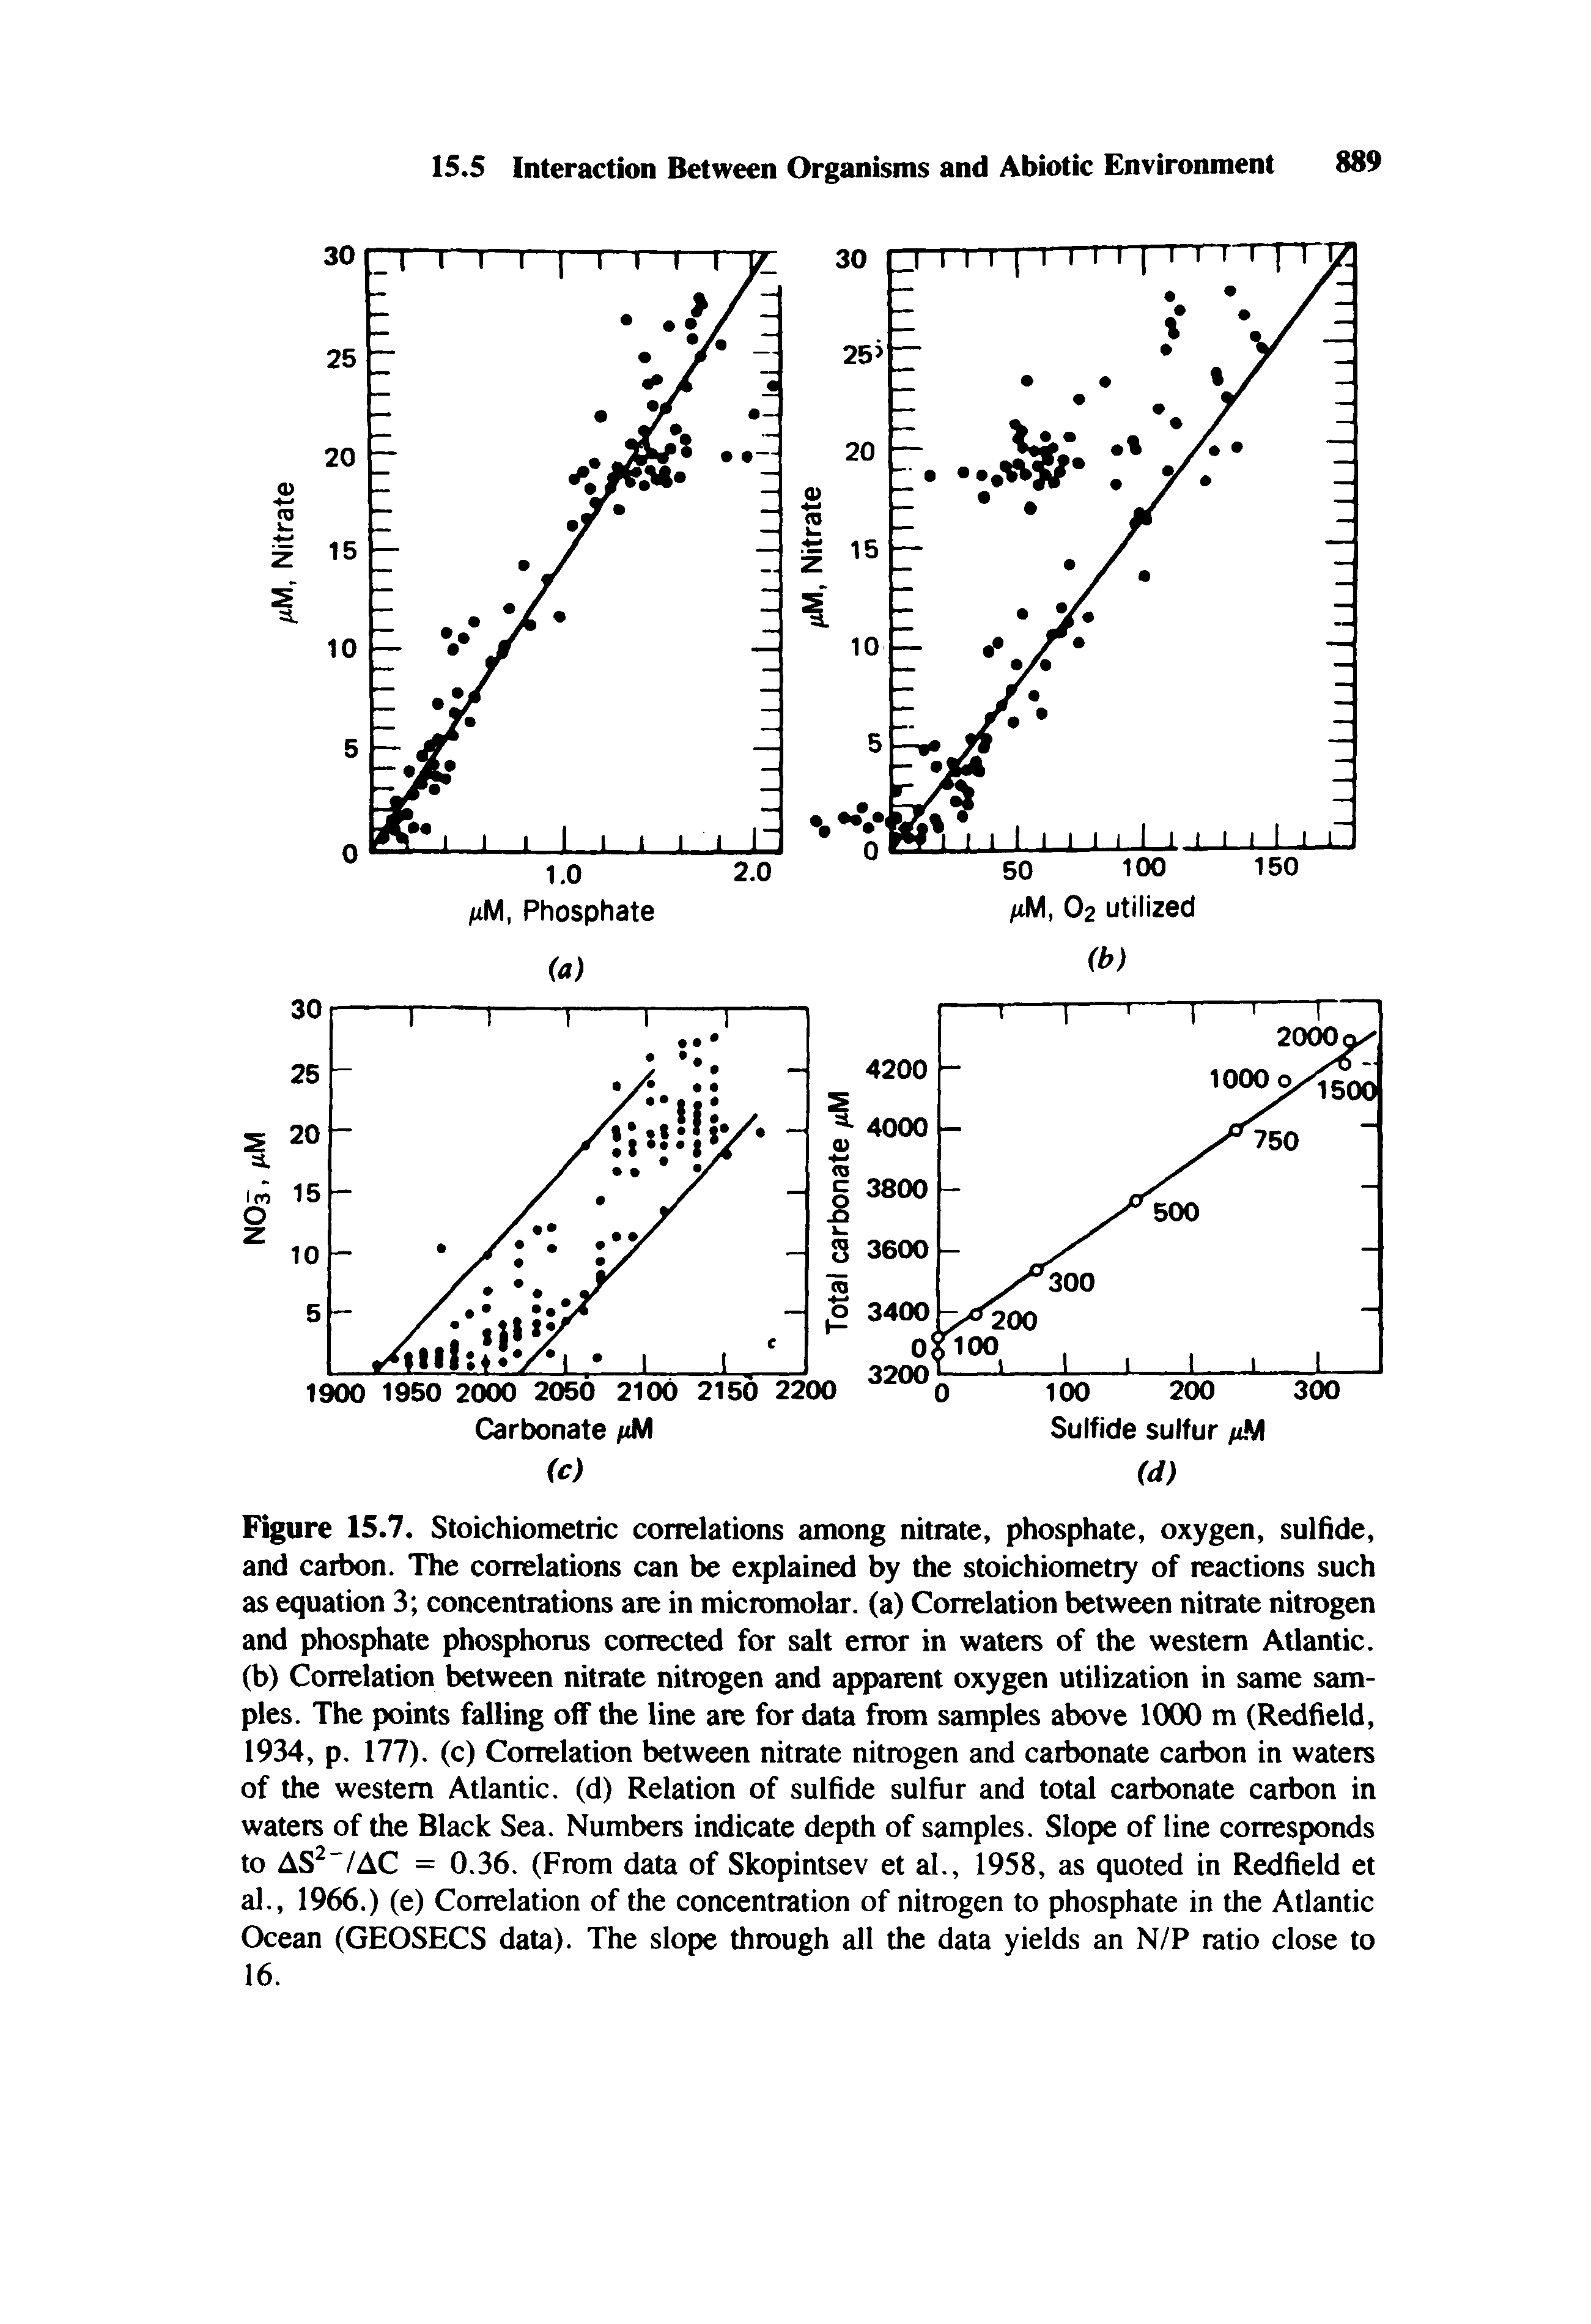 Figure 15.7. Stoichiometric correlations among nitrate, phosphate, oxygen, sulfide, and carbon. The correlations can be explained by the stoichiometry of reactions such as equation 3 concentrations are in micromolar, (a) Correlation between nitrate nitrogen and phosphate phosphoms corrected for salt error in waters of the western Atlantic, (b) Correlation between nitrate nitrogen and apparent oxygen utilization in same samples. The points falling off the line are for data from samples above 1000 m (Redfield, 1934, p. 177). (c) Correlation between nitrate nitrogen and carbonate carbon in waters of the western Atlantic, (d) Relation of sulfide sulfur and total carbonate carbon in waters of the Black Sea. Numbers indicate depth of samples. Slope of line corresponds to AS /AC = 0.36. (From data of Skopintsev et al., 1958, as quoted in Redfield et al., 1966.) (e) Correlation of the concentration of nitrogen to phosphate in the Atlantic Ocean (GEOSECS data). The slope through all the data yields an N/P ratio close to 16.